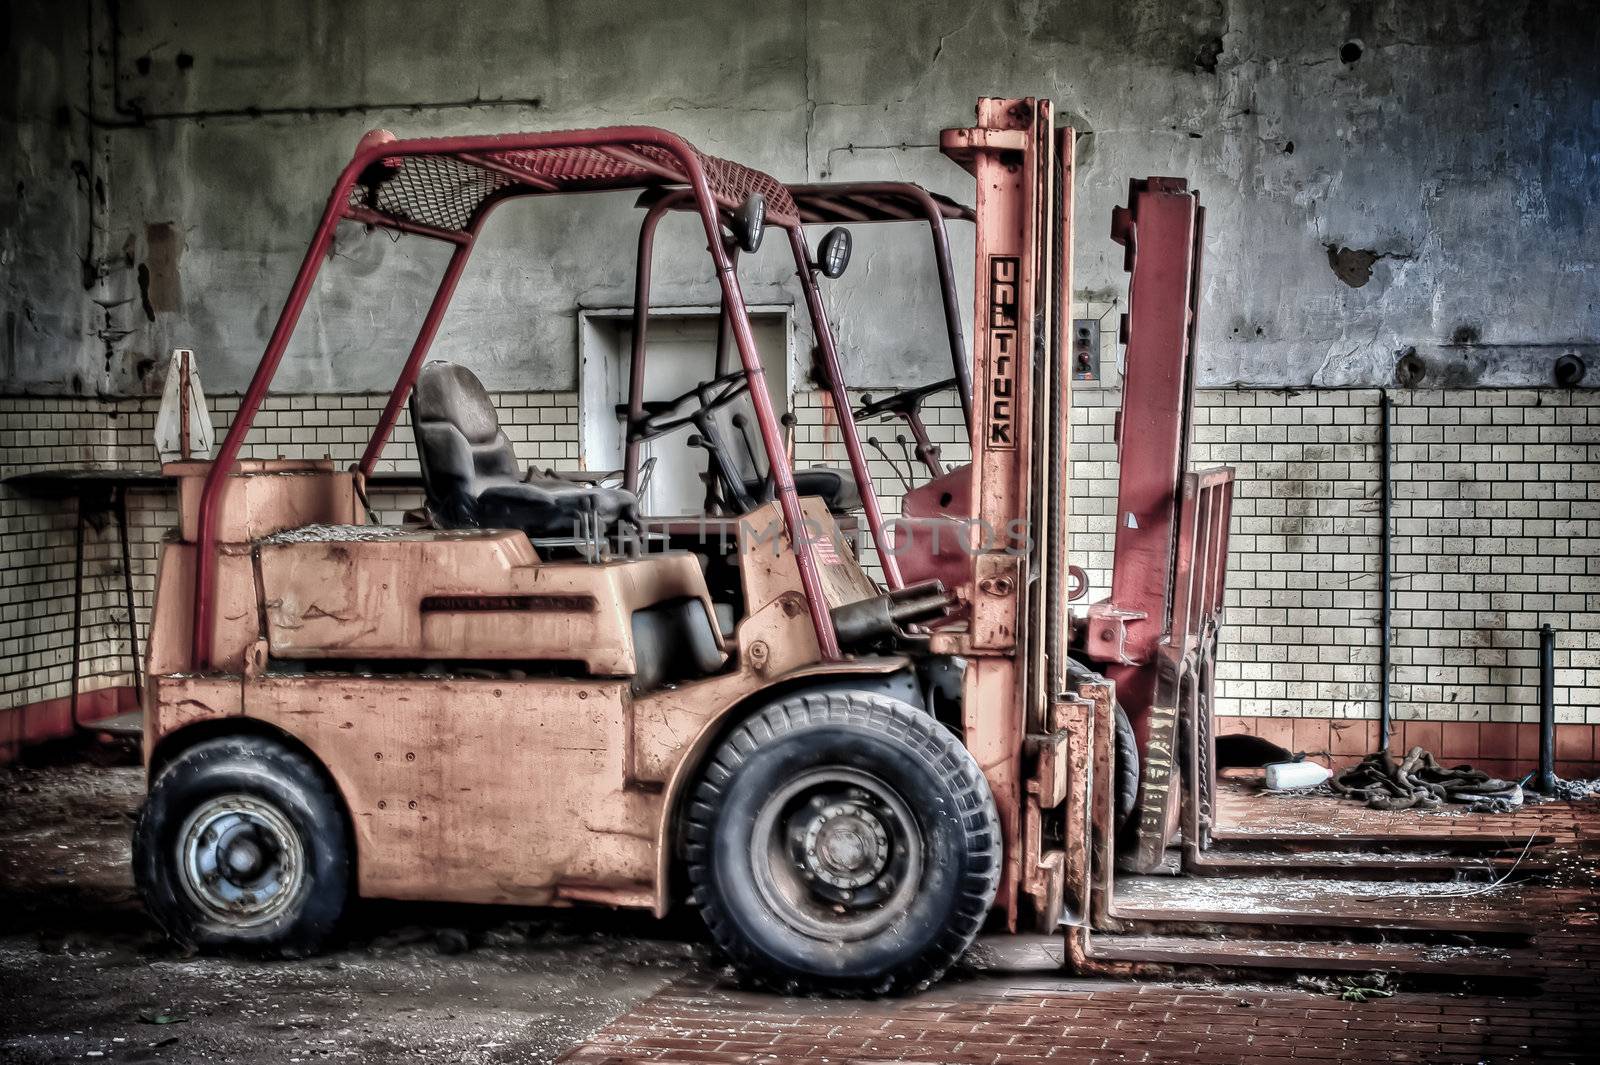 2 Abandoned Fork Lifts in a abandoned factory. HDRi